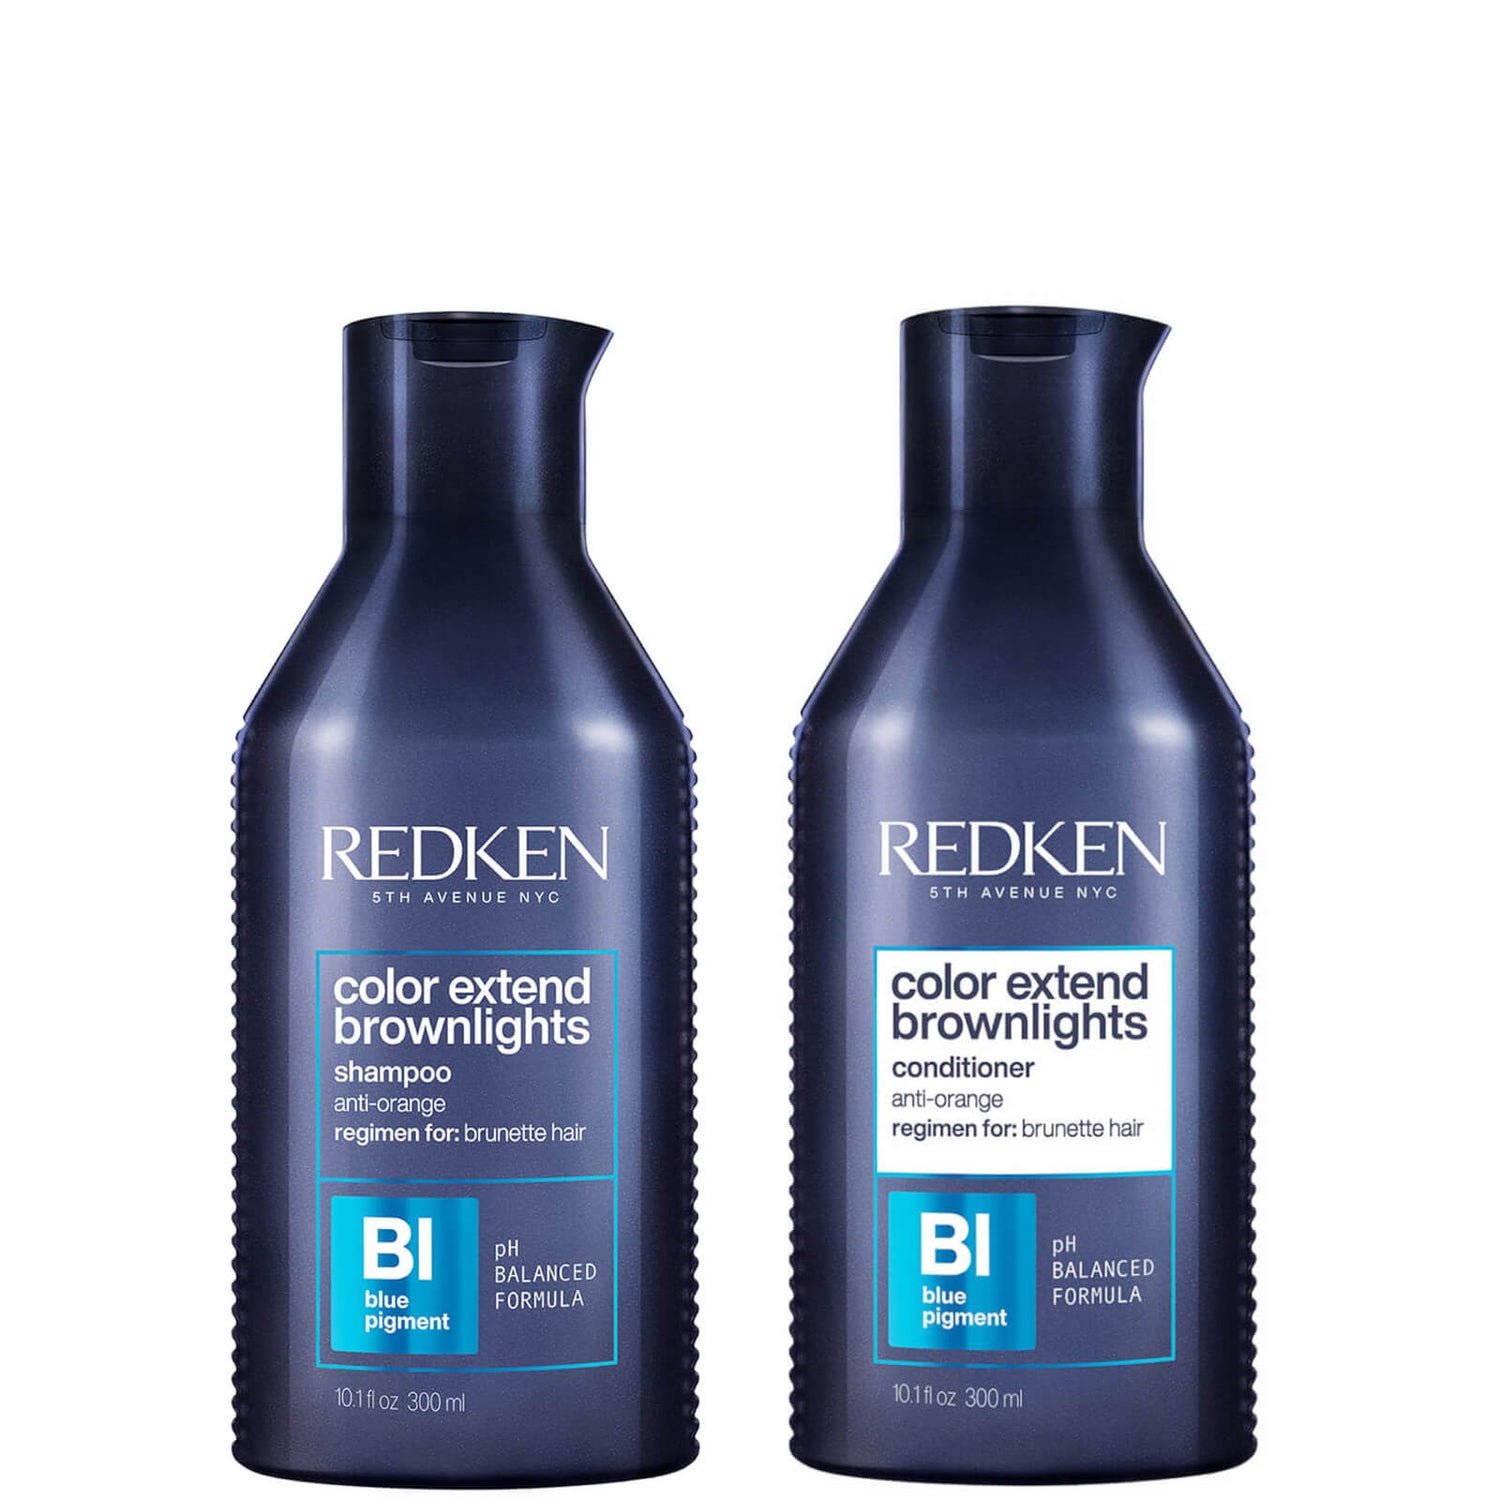 Redken Colour Extend Brownlights Shampoo and Conditioner Duo (Worth $76.00)